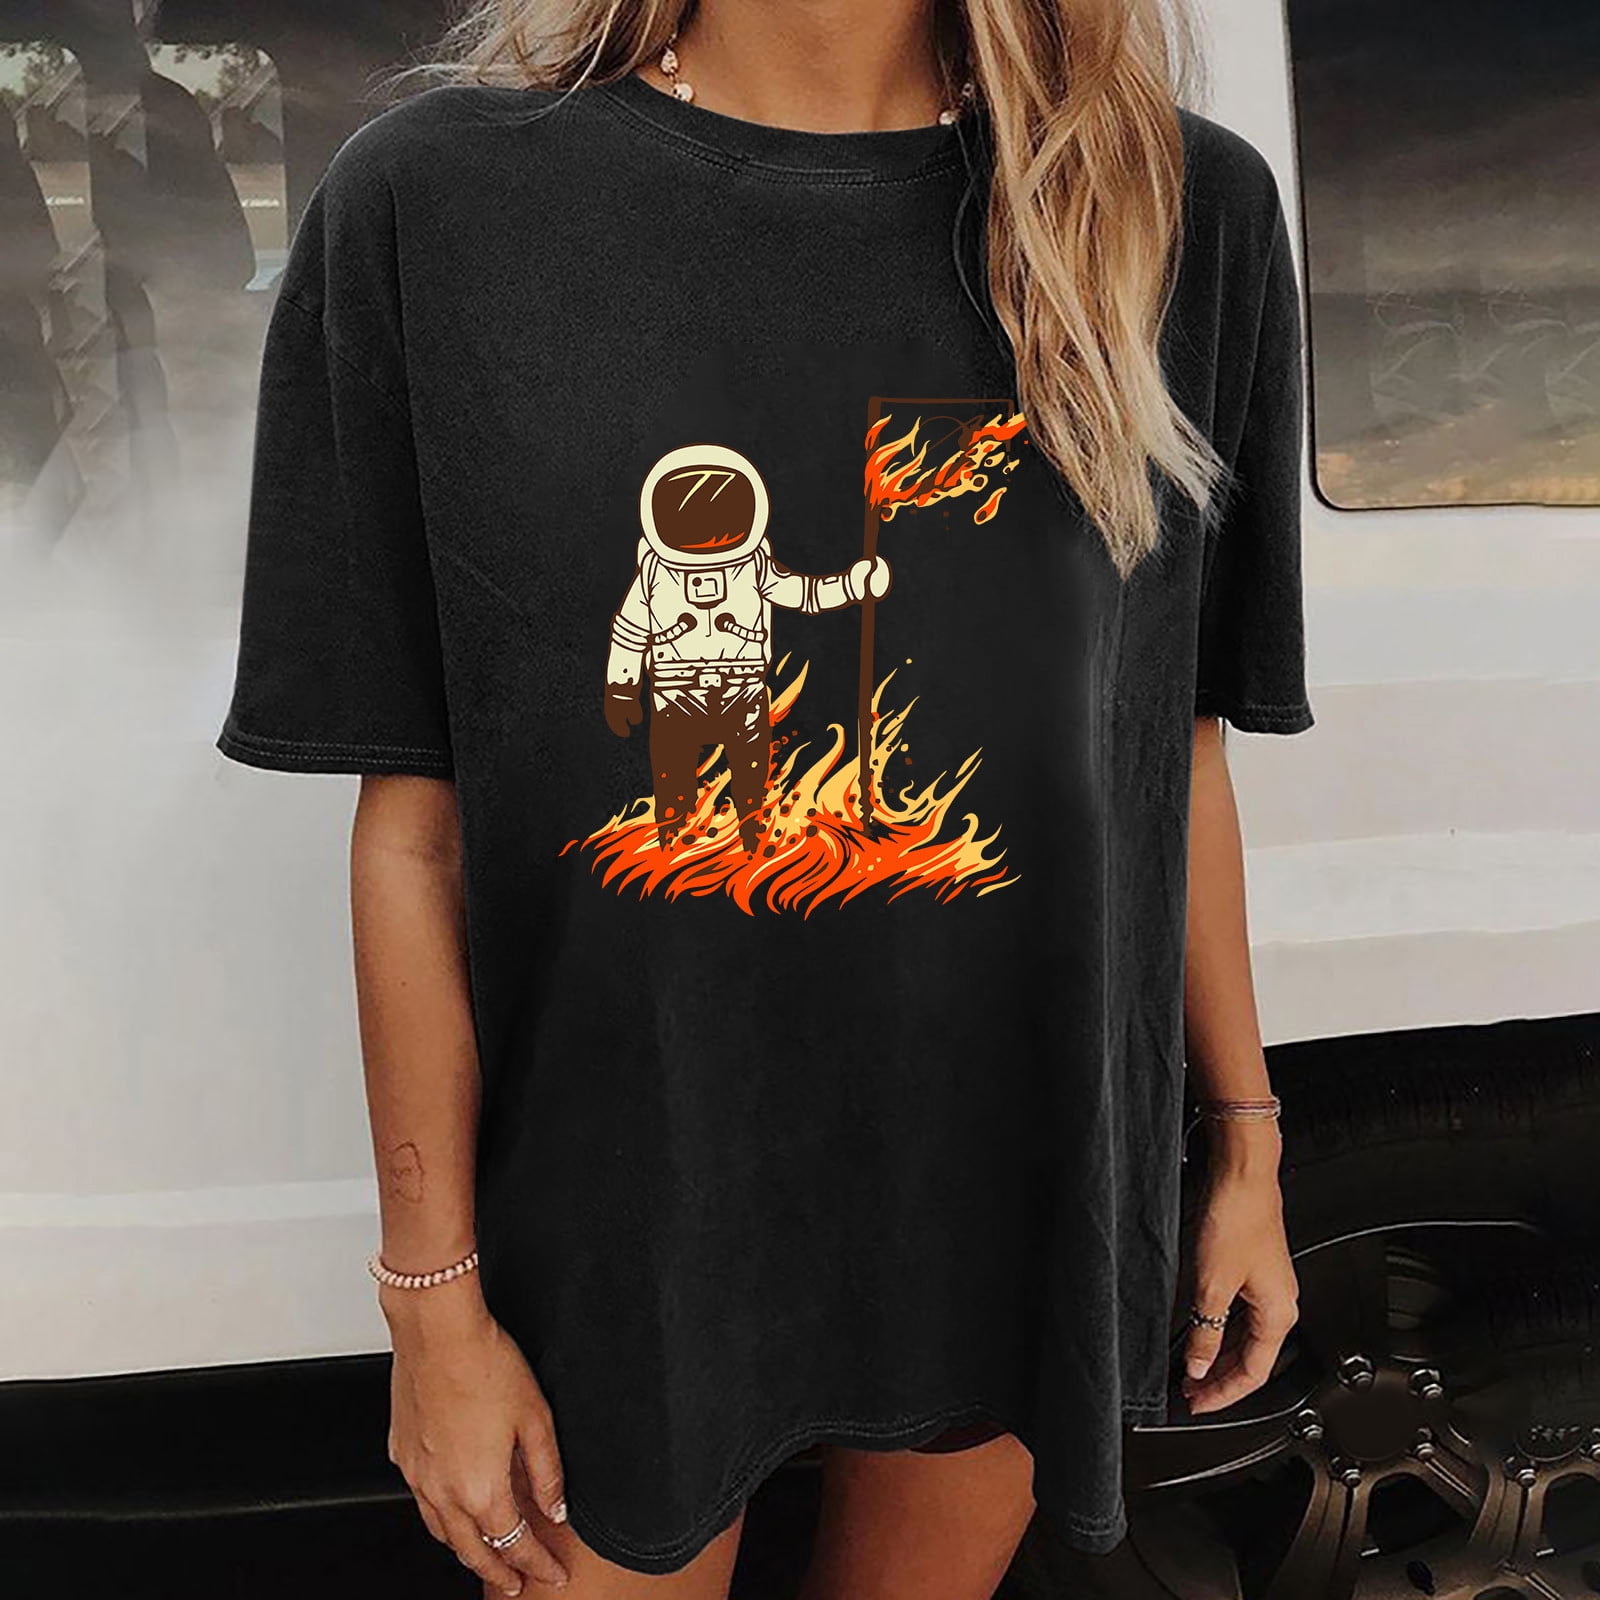 Vintage Graphic Tees for Women Tshirts Aesthetic T Shirt Baggy Cute Halloween Gothic Shirts for Teen Girl - Walmart.com